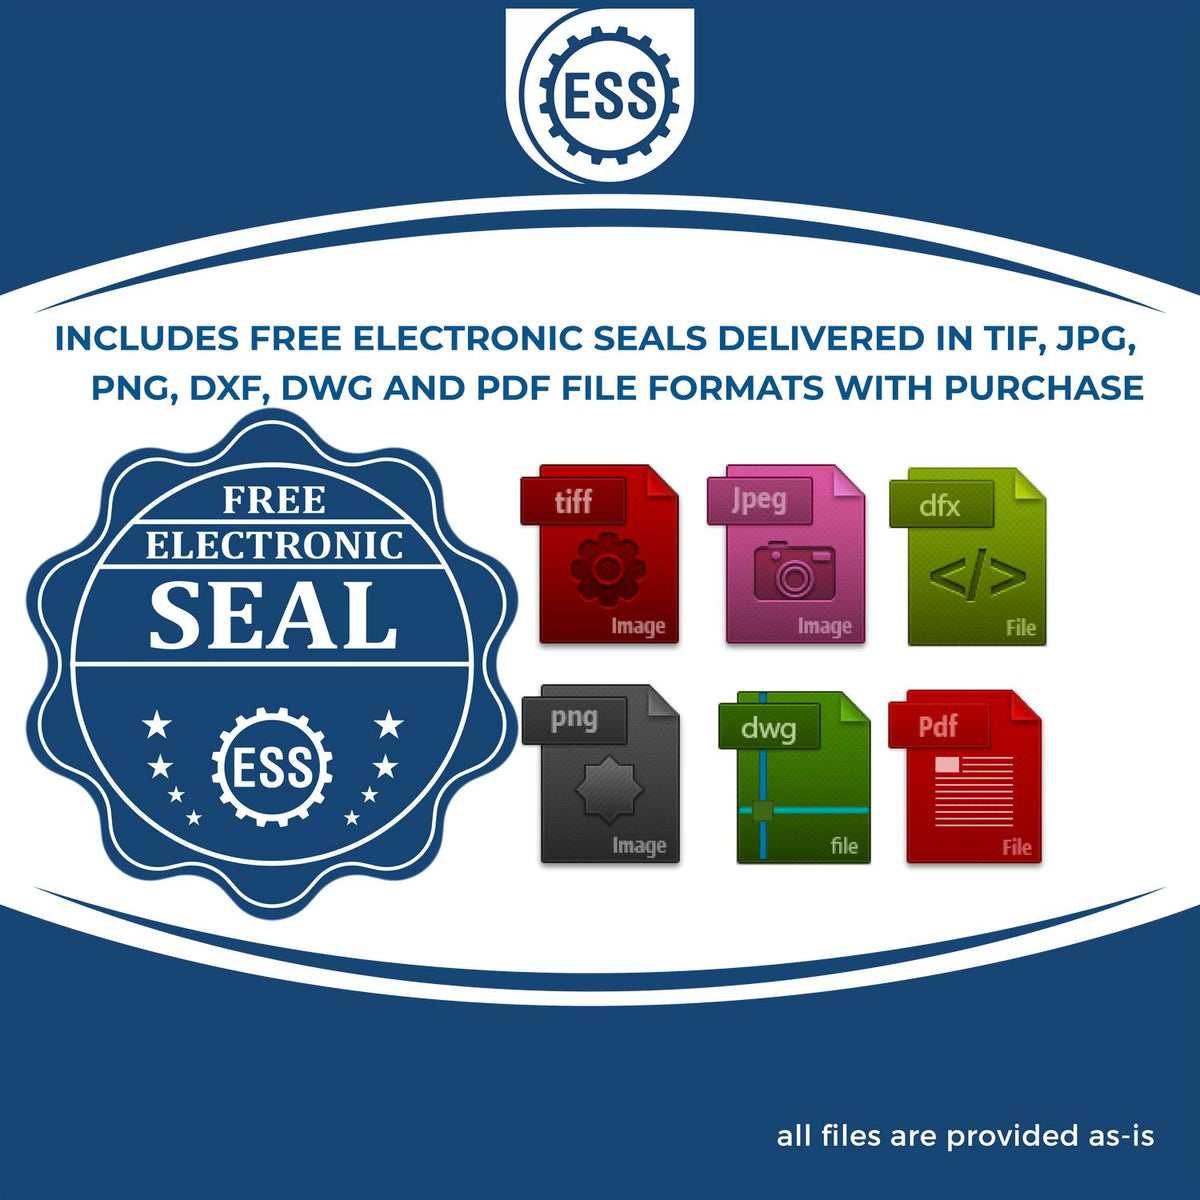 An infographic for the free electronic seal for the Premium MaxLight Pre-Inked Hawaii Engineering Stamp illustrating the different file type icons such as DXF, DWG, TIF, JPG and PNG.